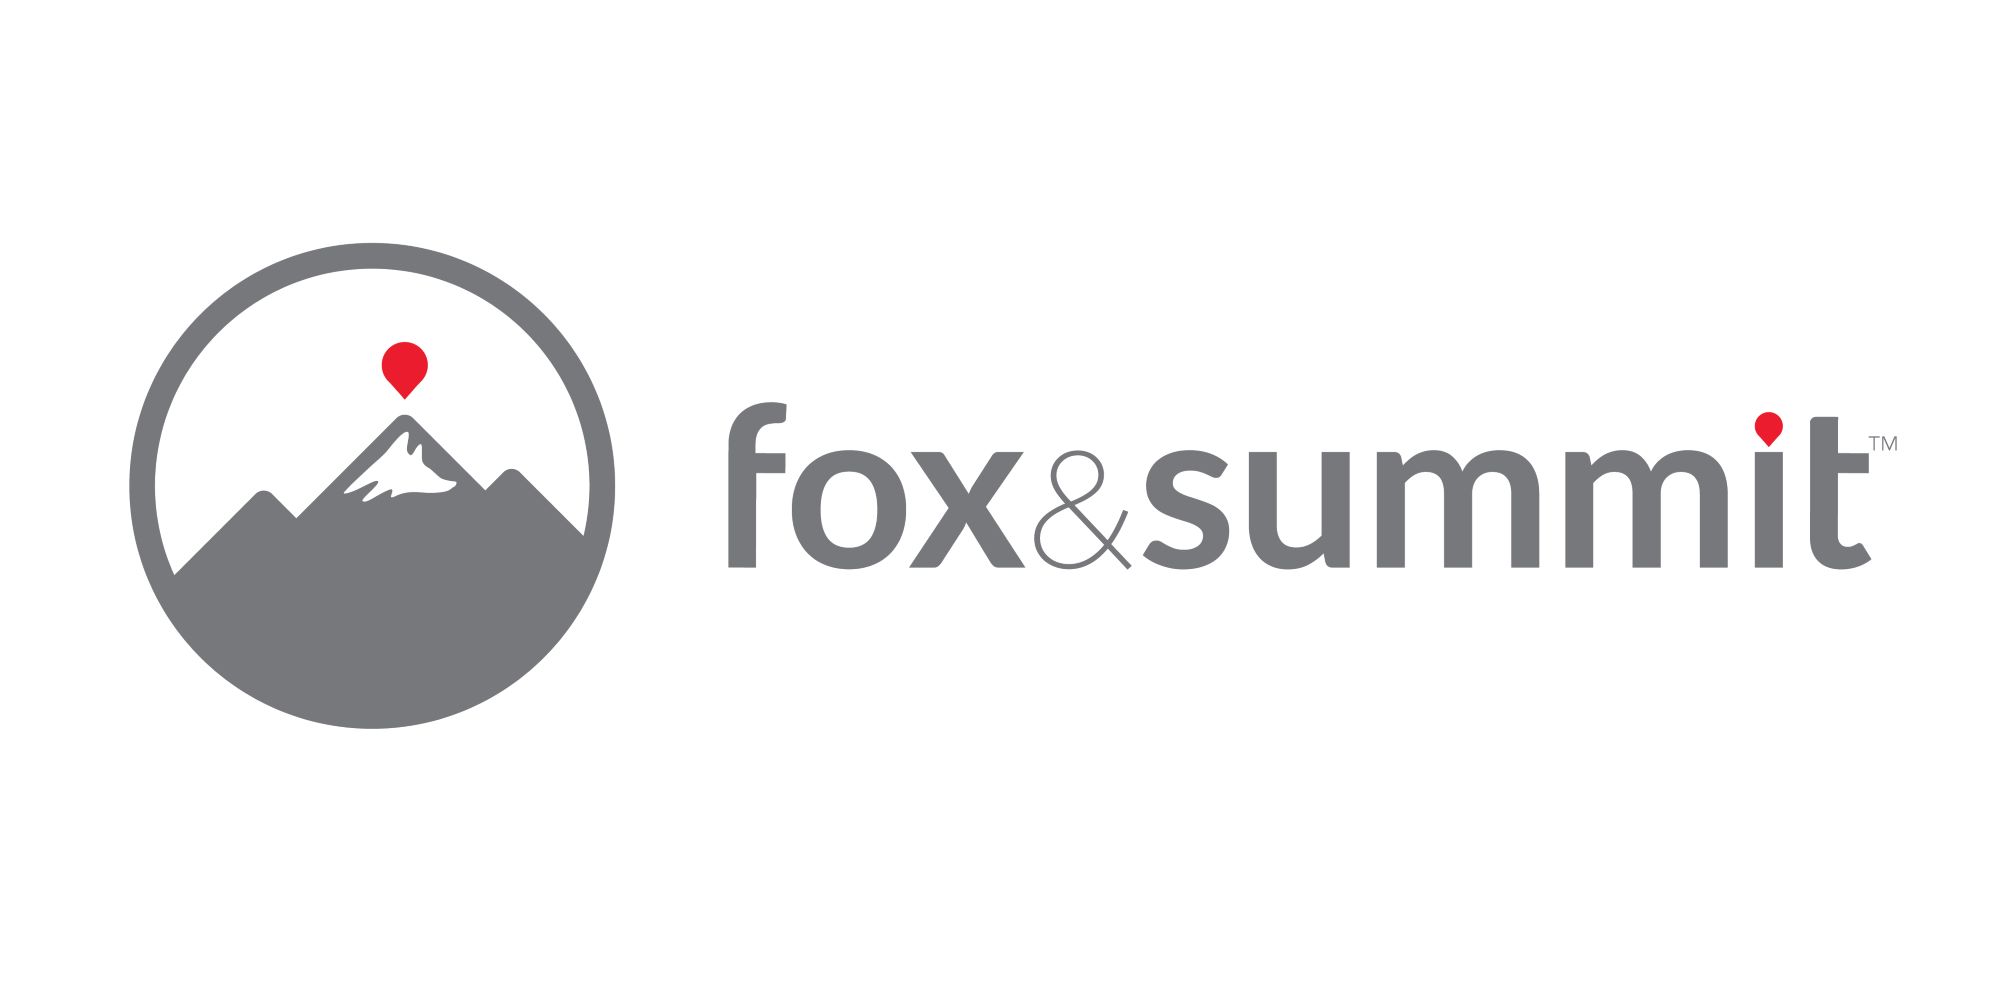 EntSun News - Fox&Summit™ Smart Home Devices are Coming to ...